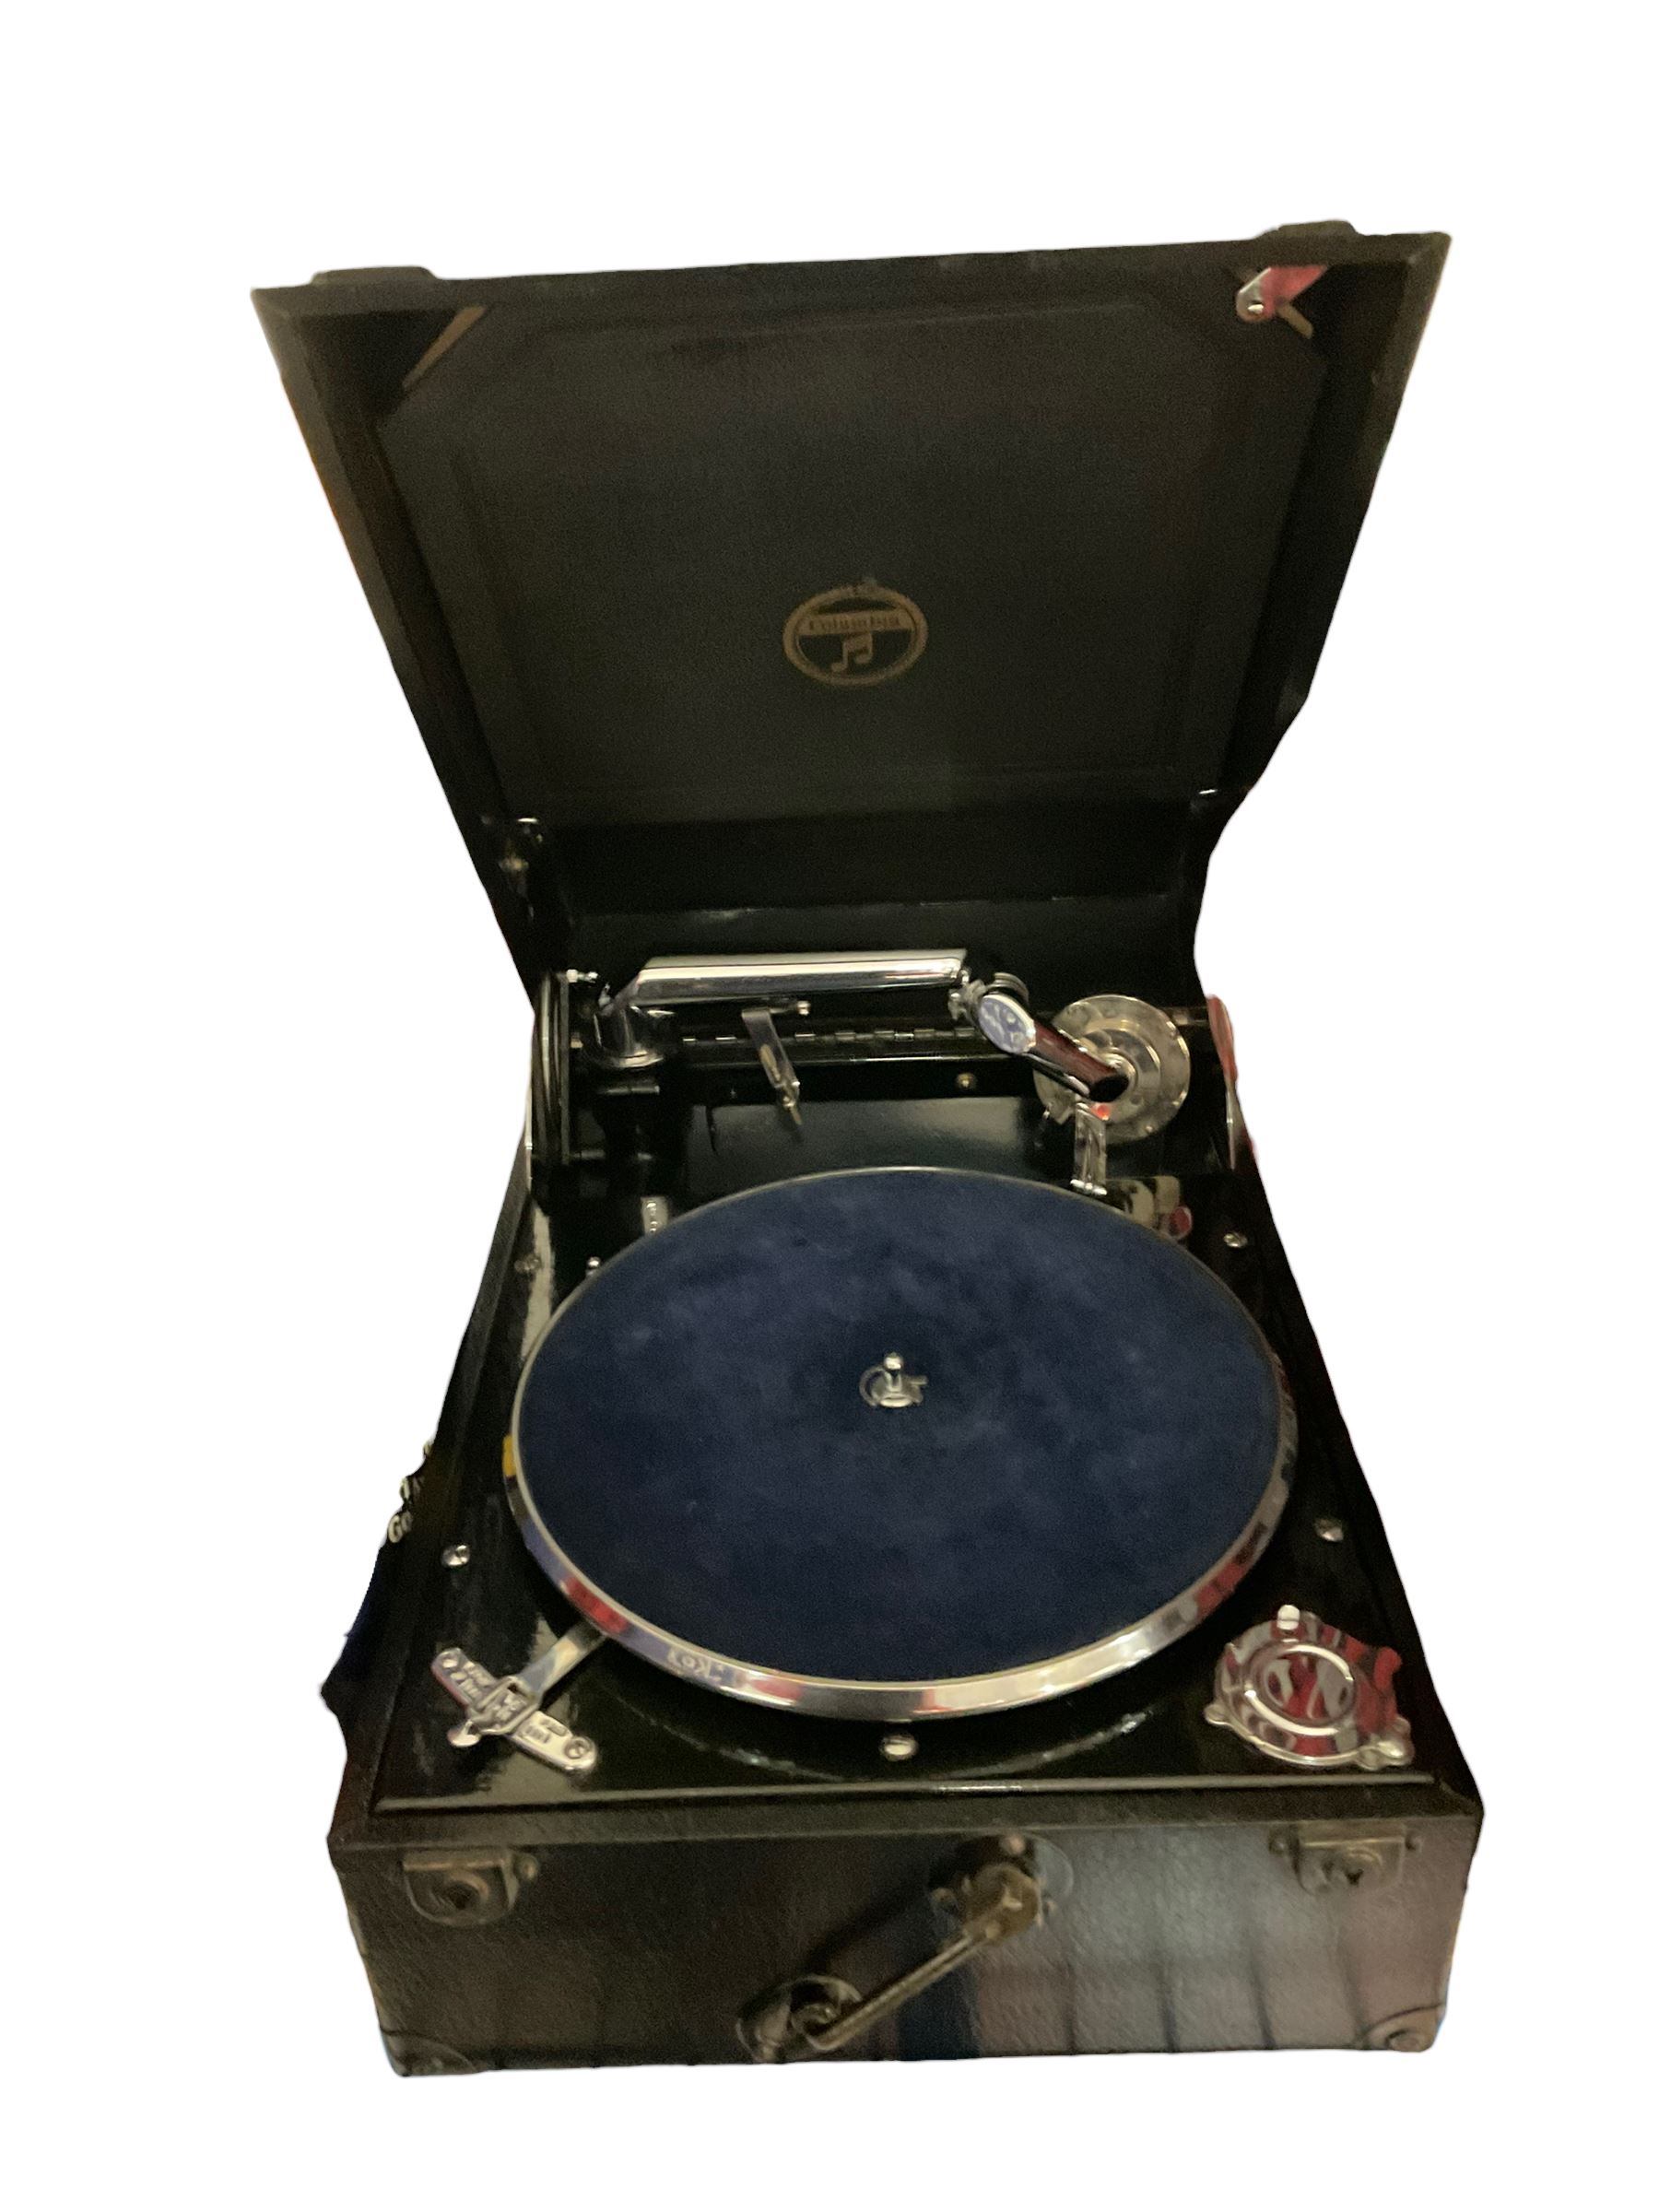 Columbia portable wind up record player - Image 2 of 4